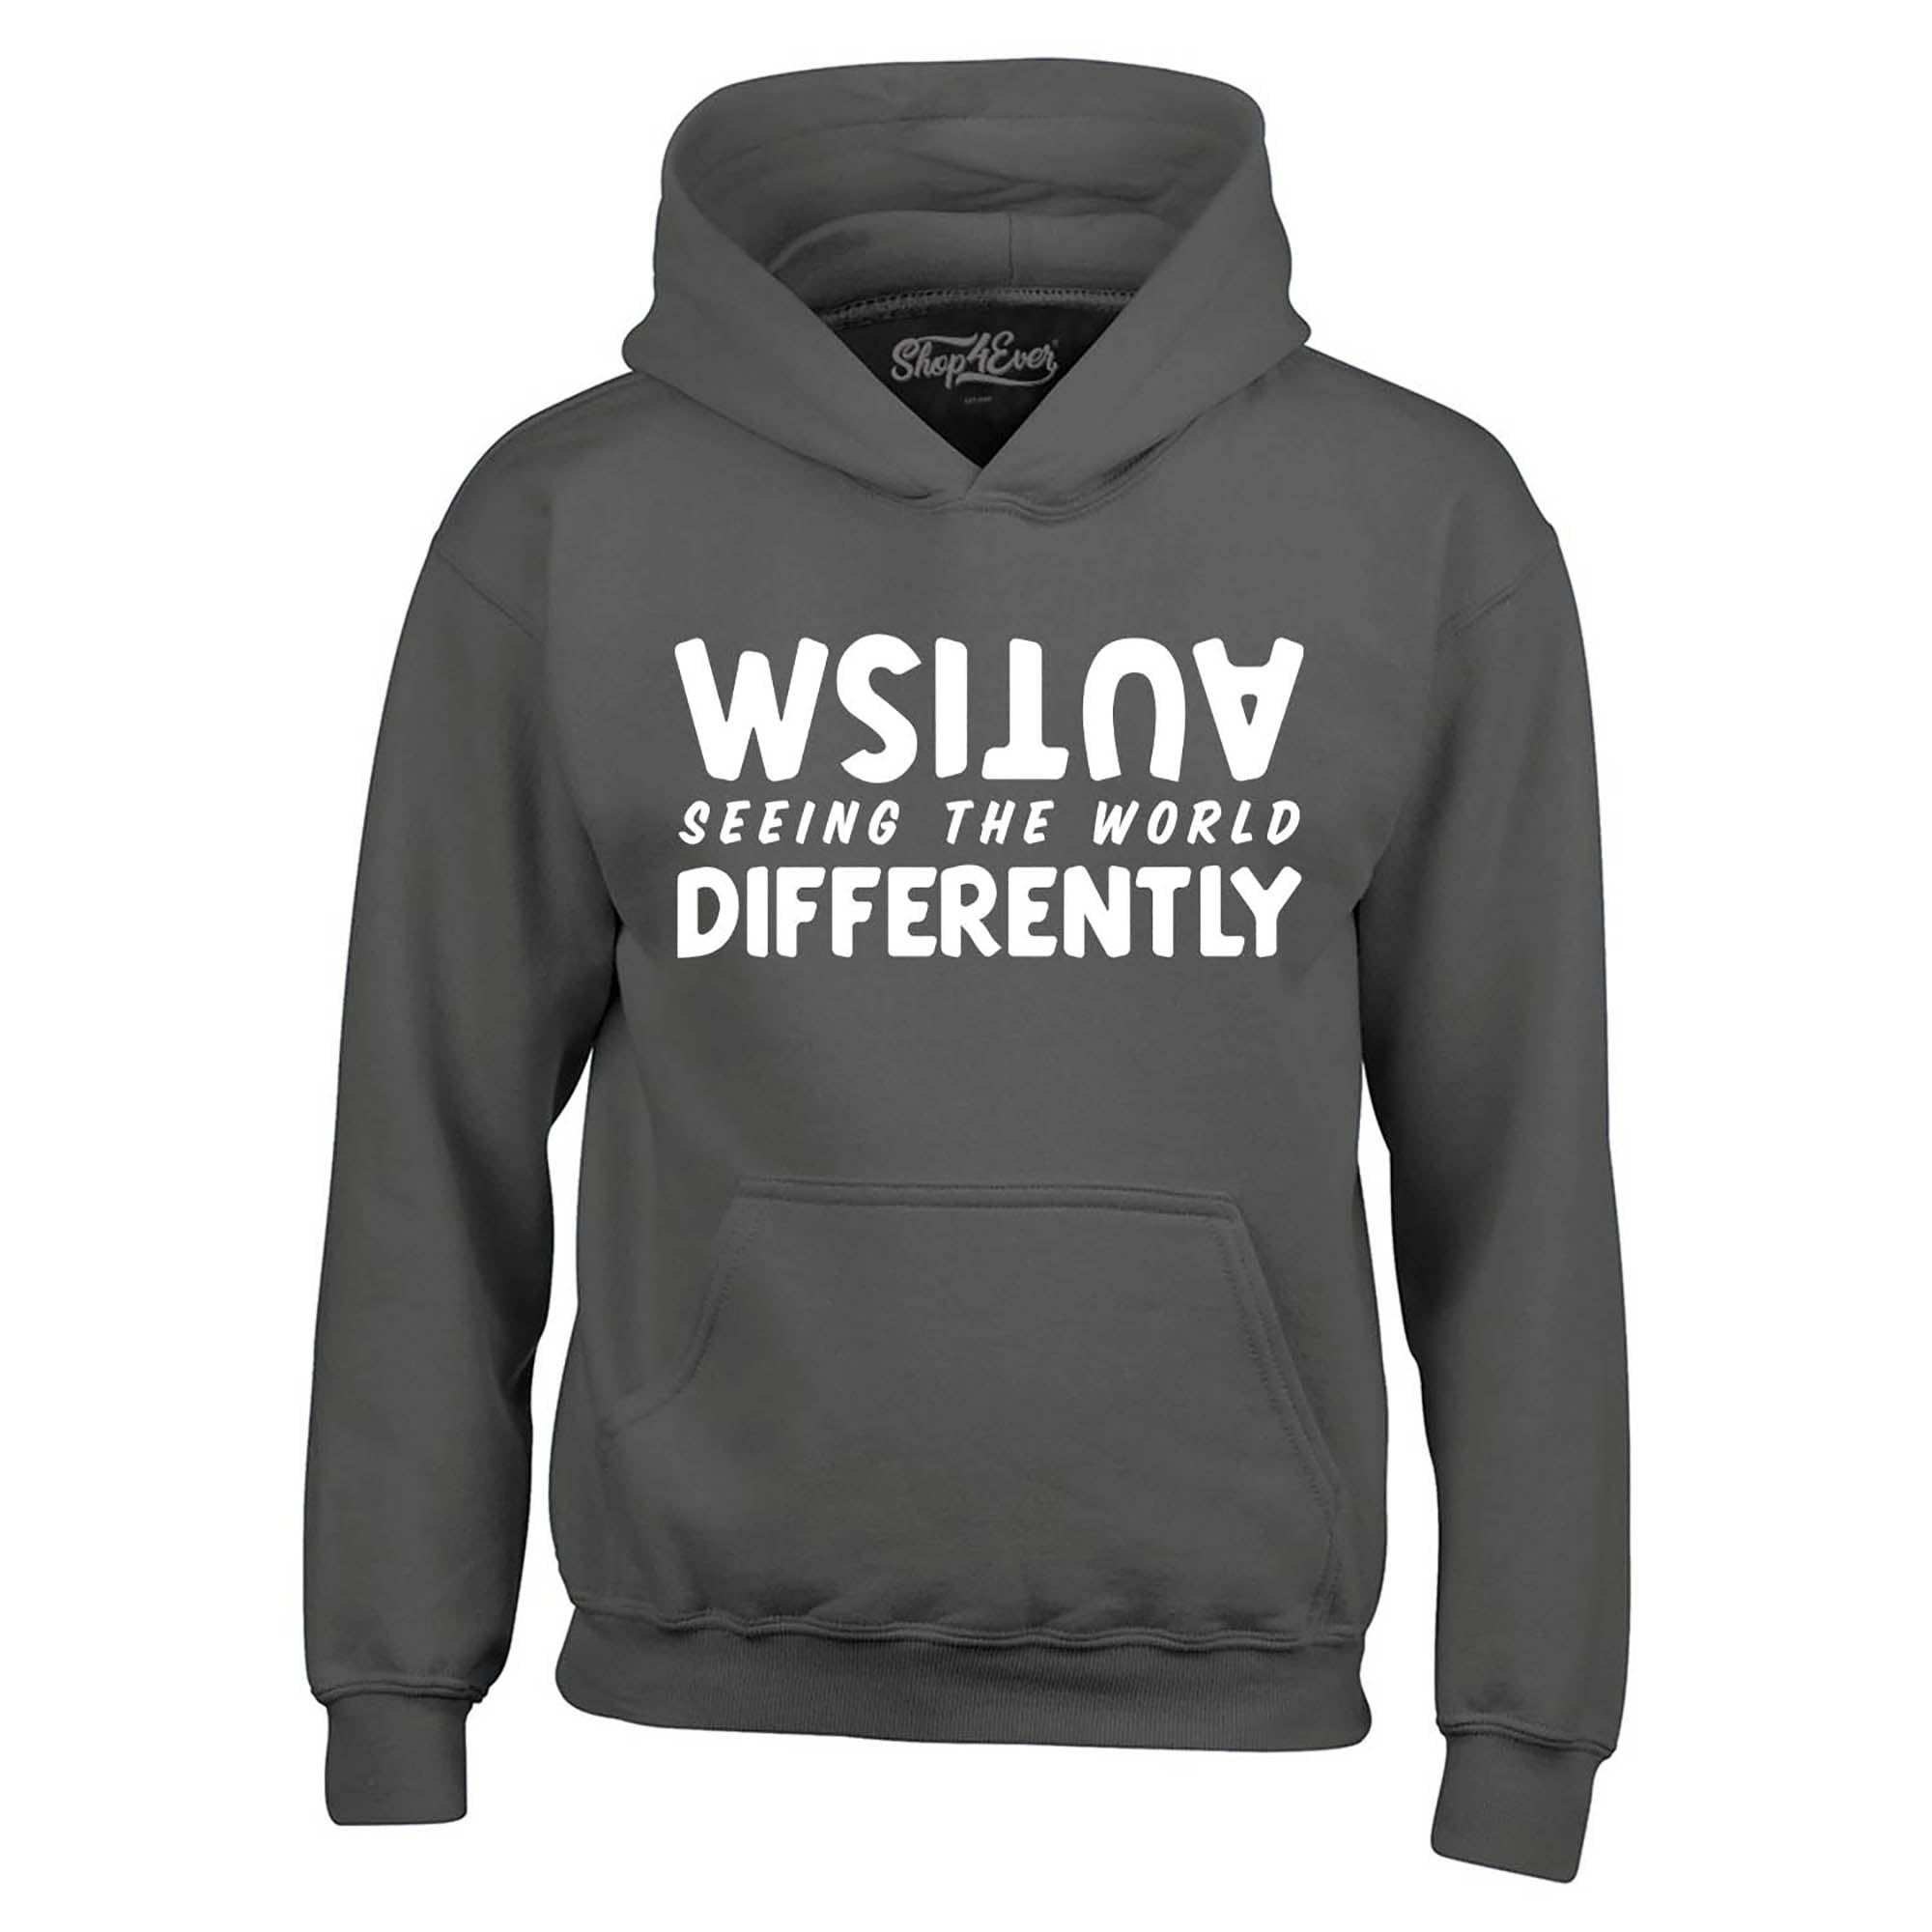 Autism Seeing the World Differently Hoodie Sweatshirts